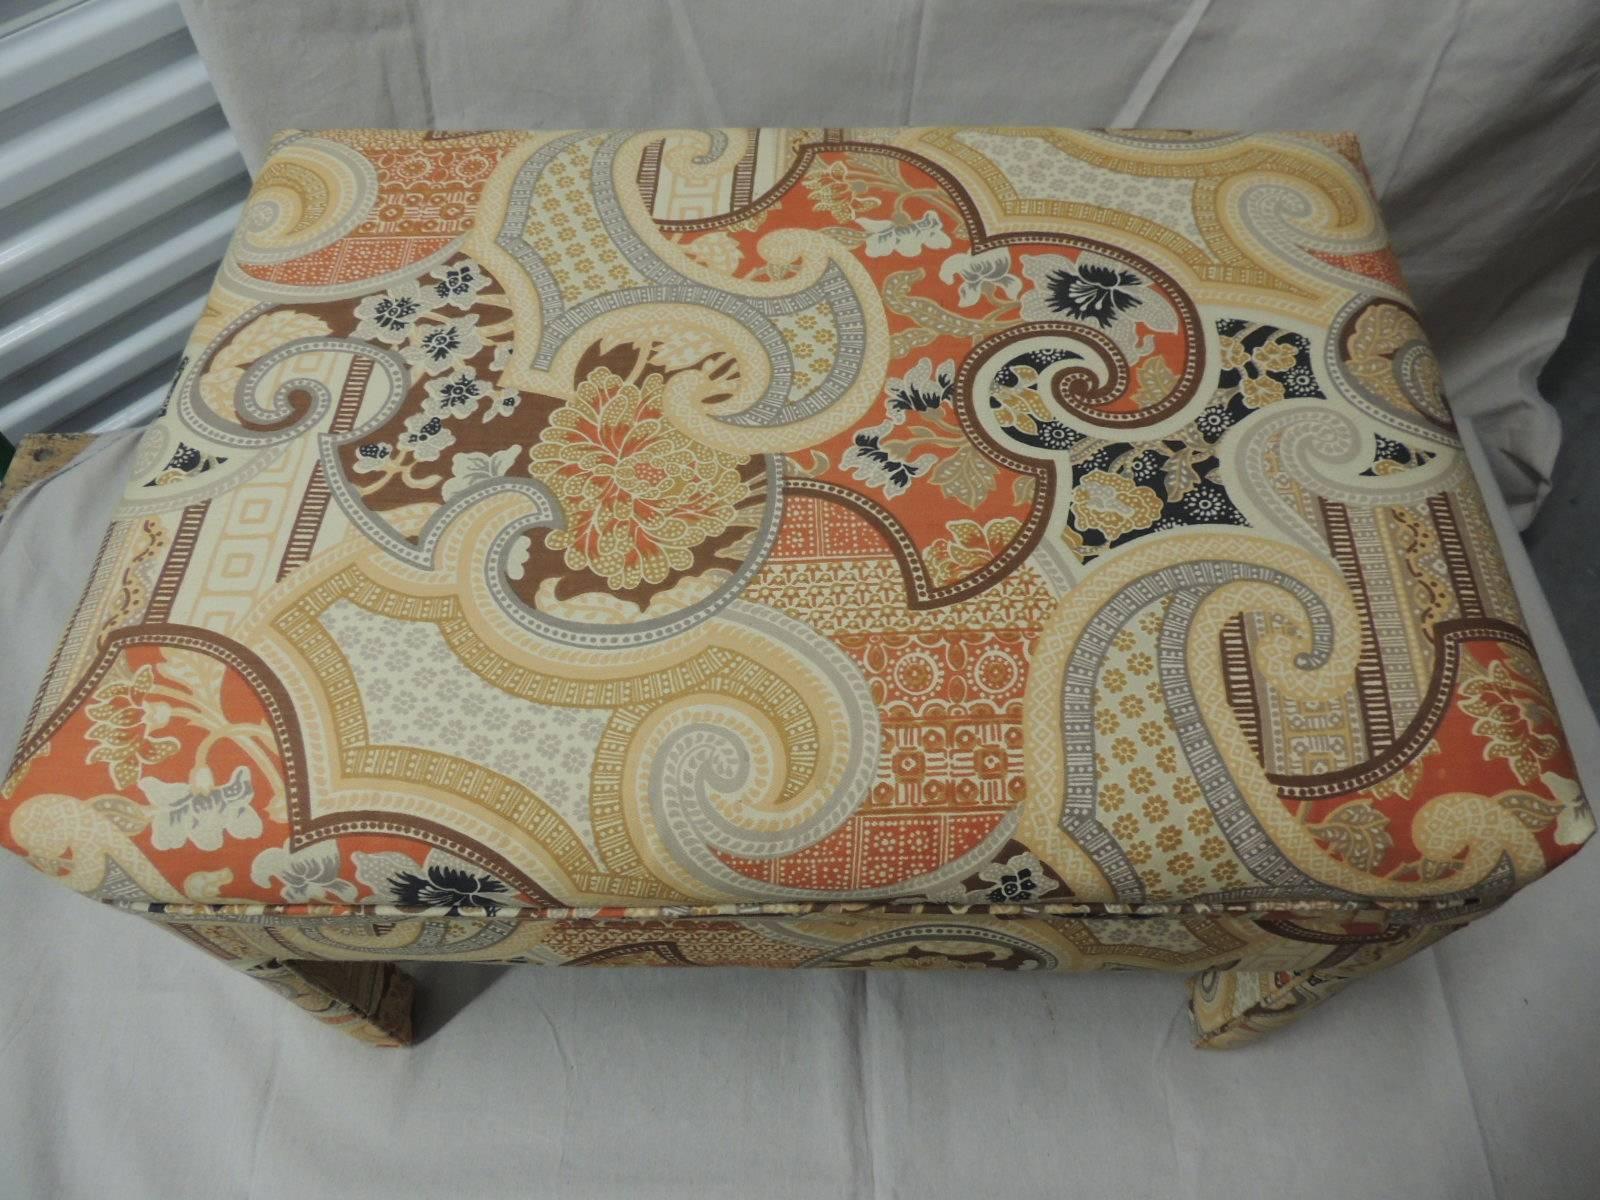 Vintage rectangular batik paisley fully upholster ottoman or bench. Mid-Century Modern style stools. Self welt on cushions and around legs, Seat cushion is foam with small self welt around it, Another is available, see listing on our page. Frame is